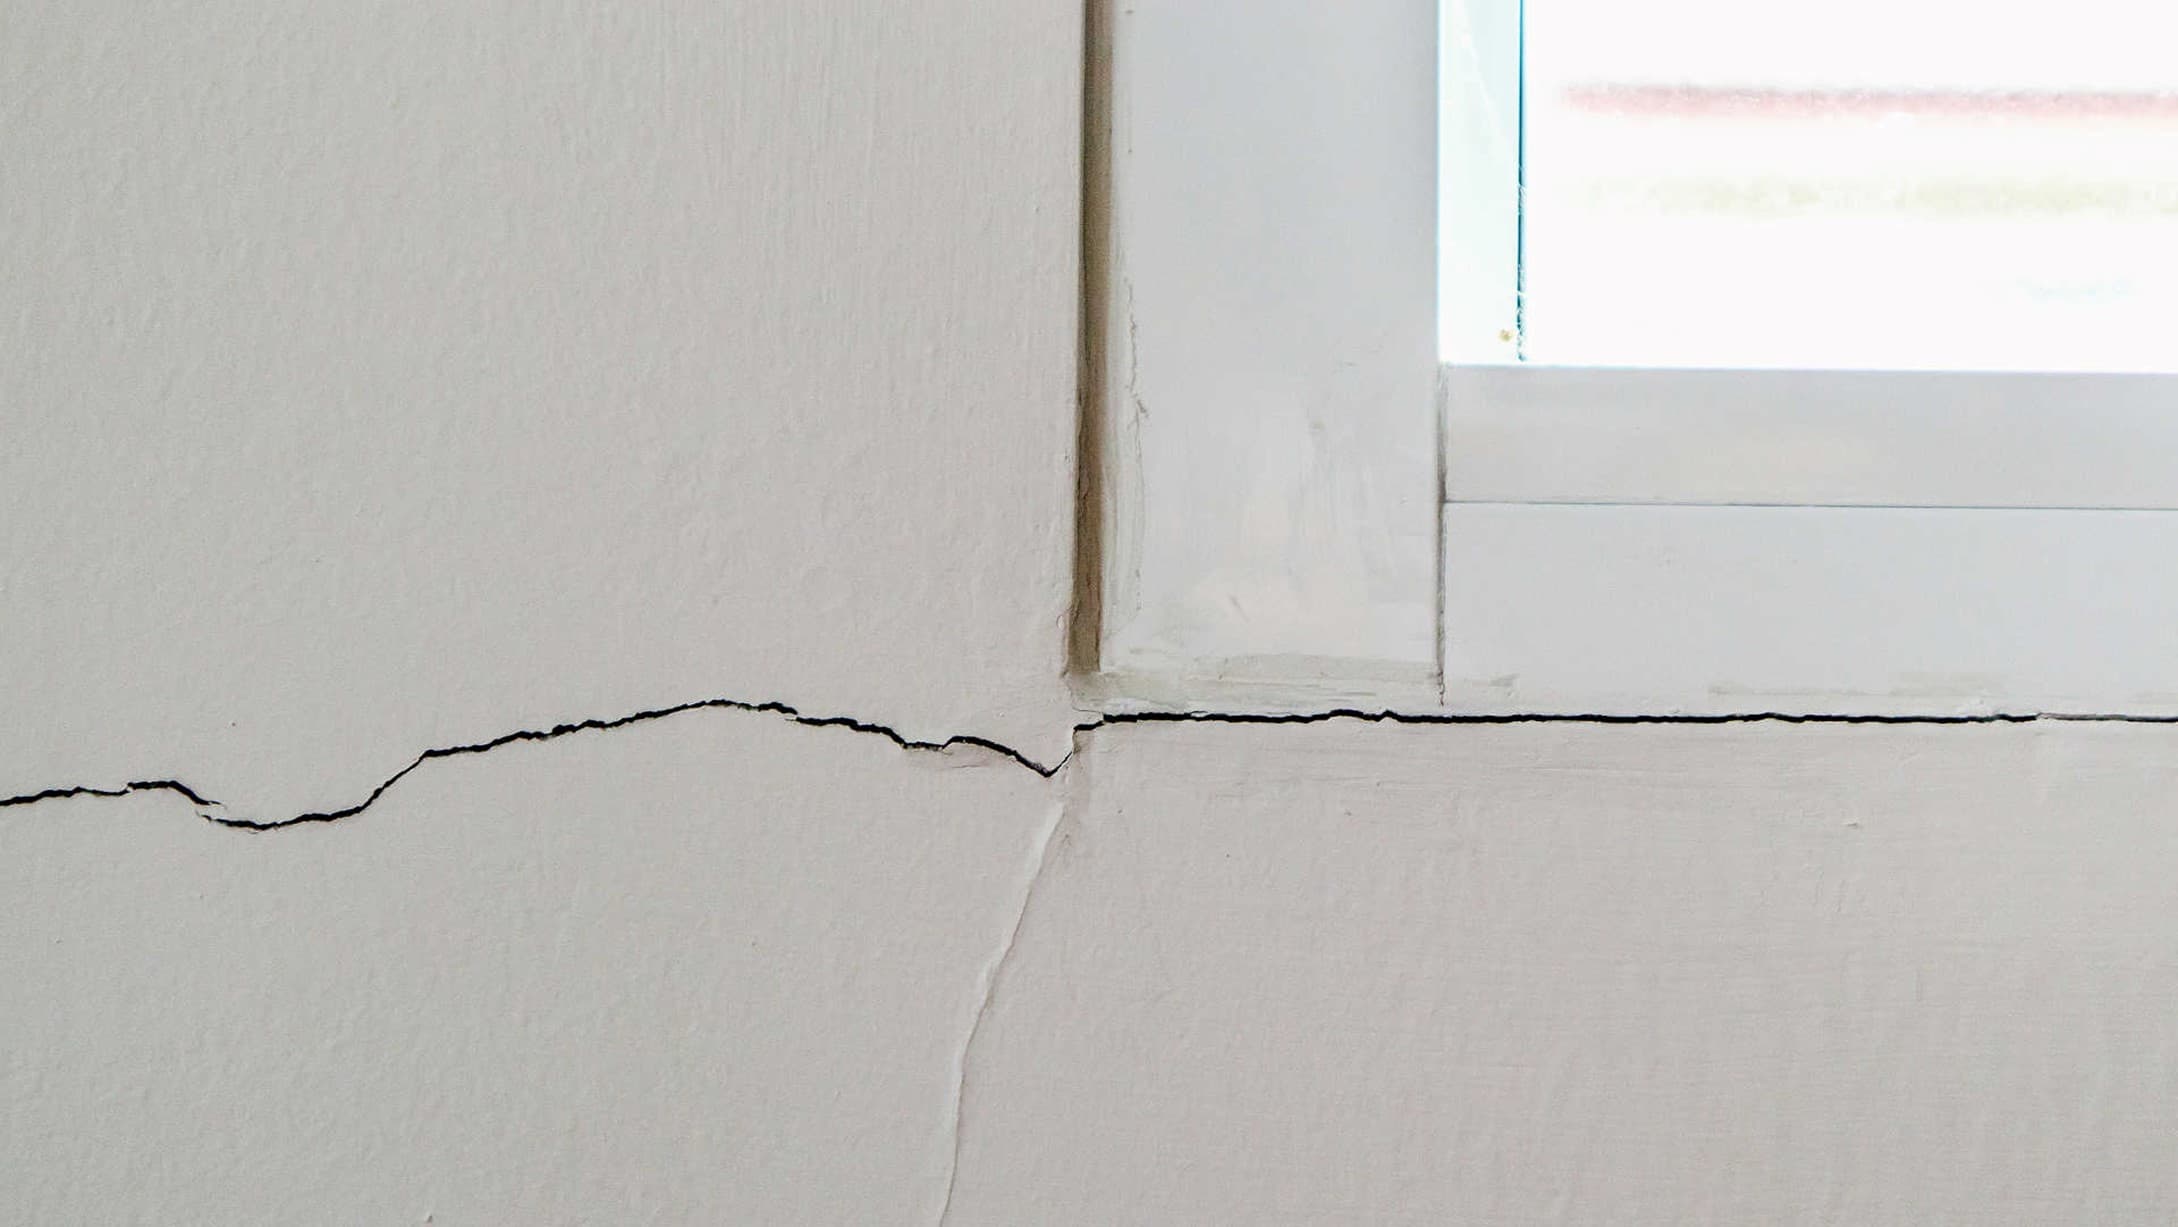 A crack running along a window, indicating first signs of foundation issues